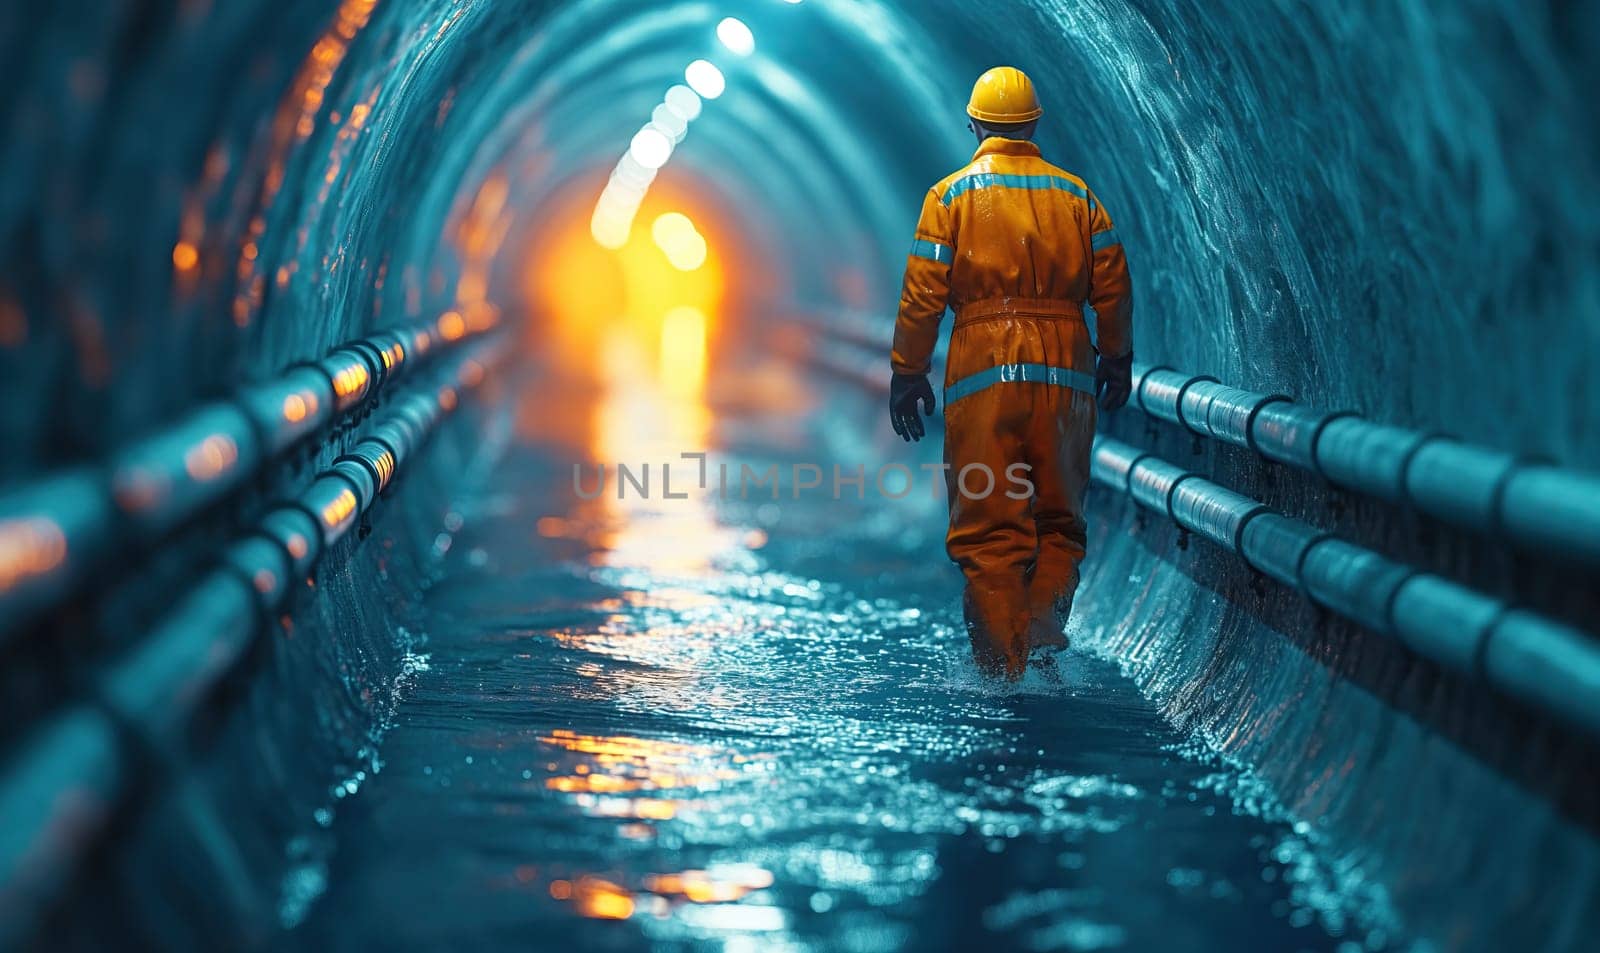 A worker walks in a round tunnel through water. Selective soft focus.